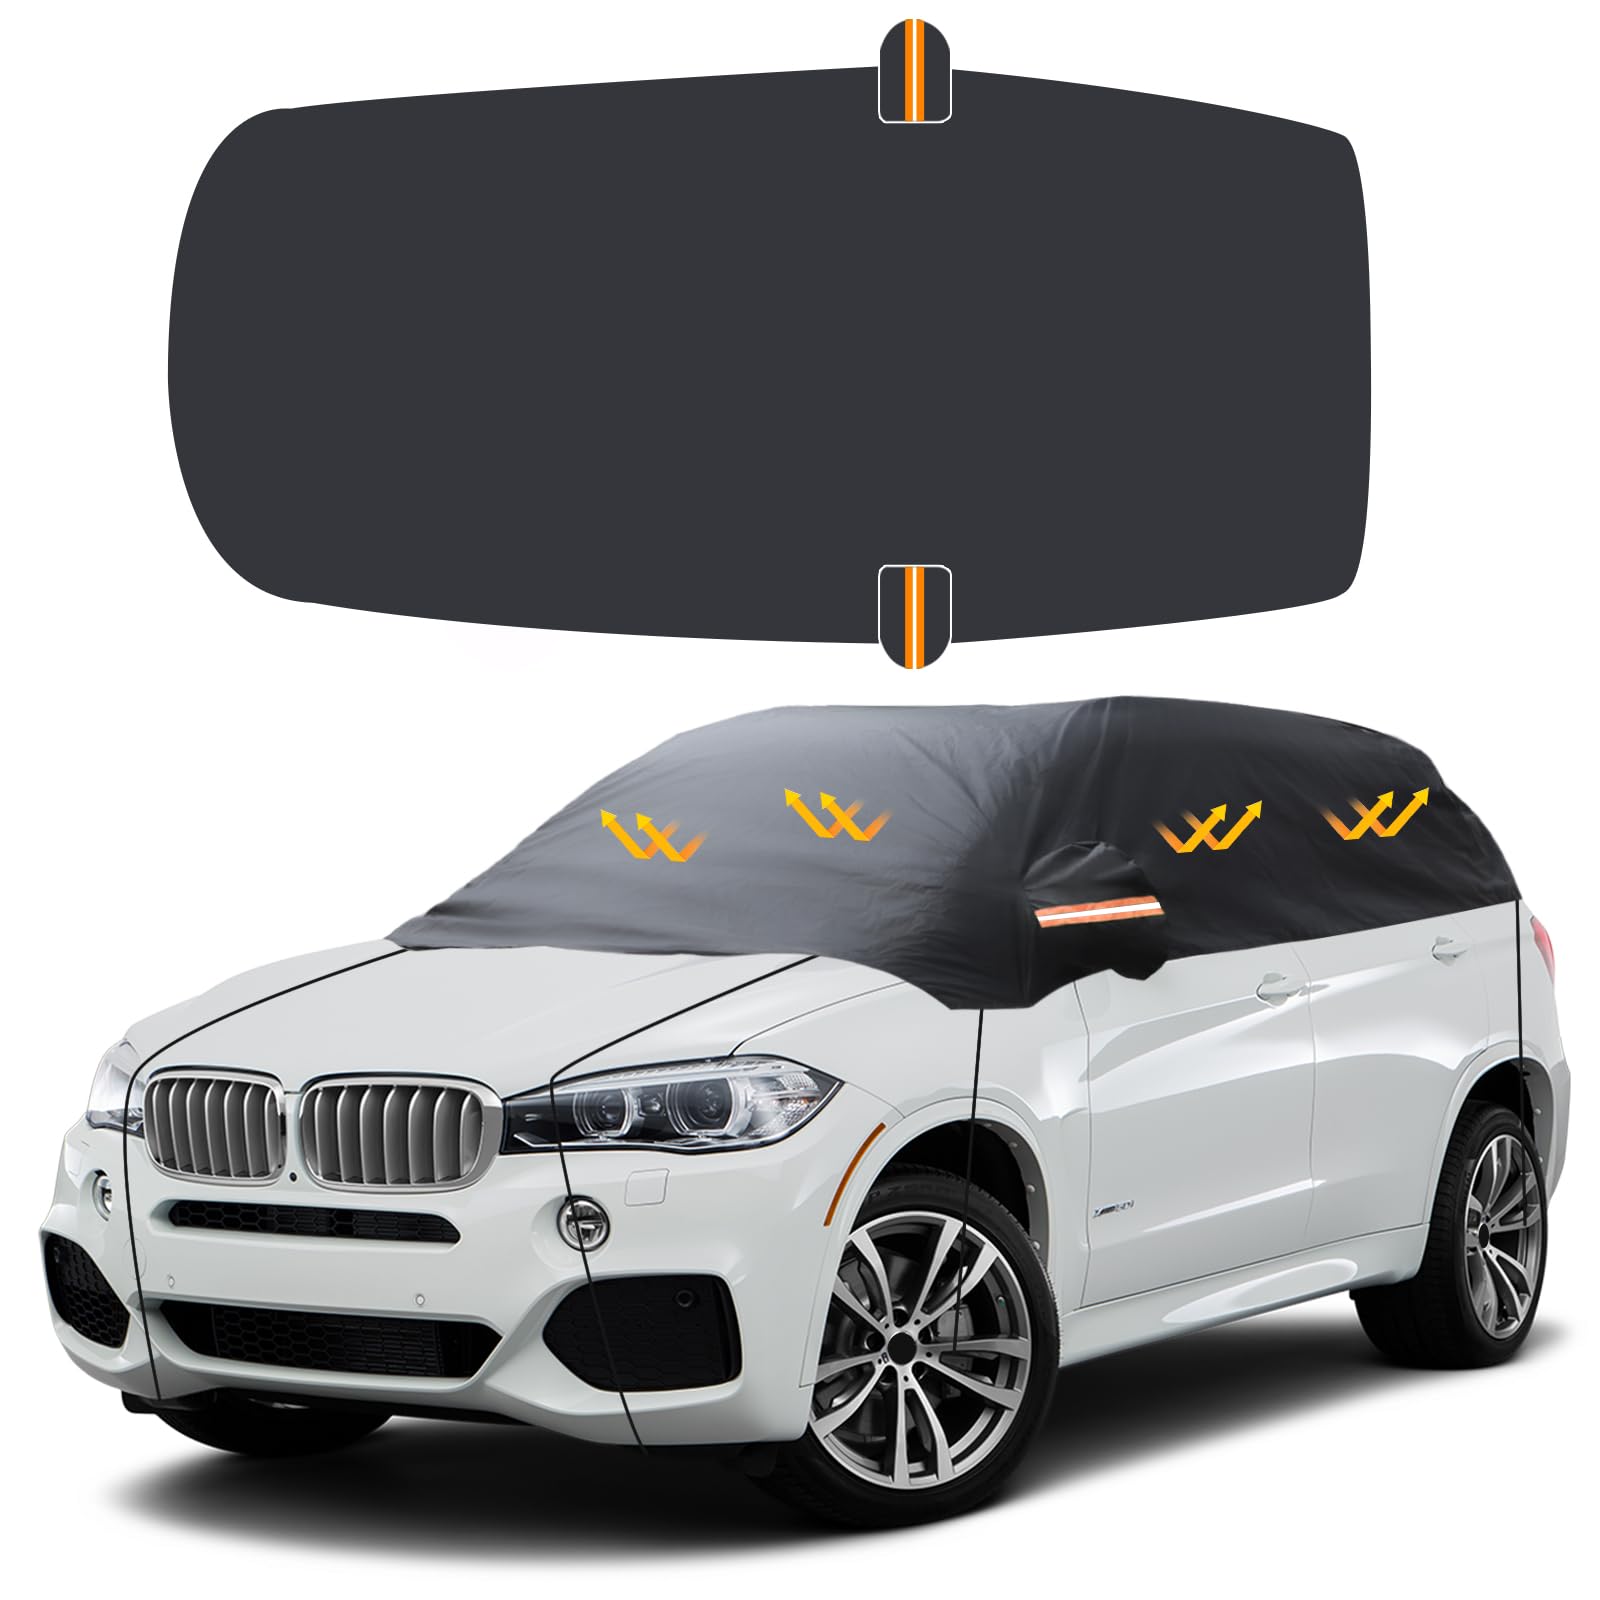 Car Windscreen Sunshade Ninonly 210D Car Front Windscreen Wrap Cover Reflective UV Dust Protector Block UV Rays Foldable Seamless Car Windshield Sun Protection for SUVs Up to 4.5-5.5M von Ninonly